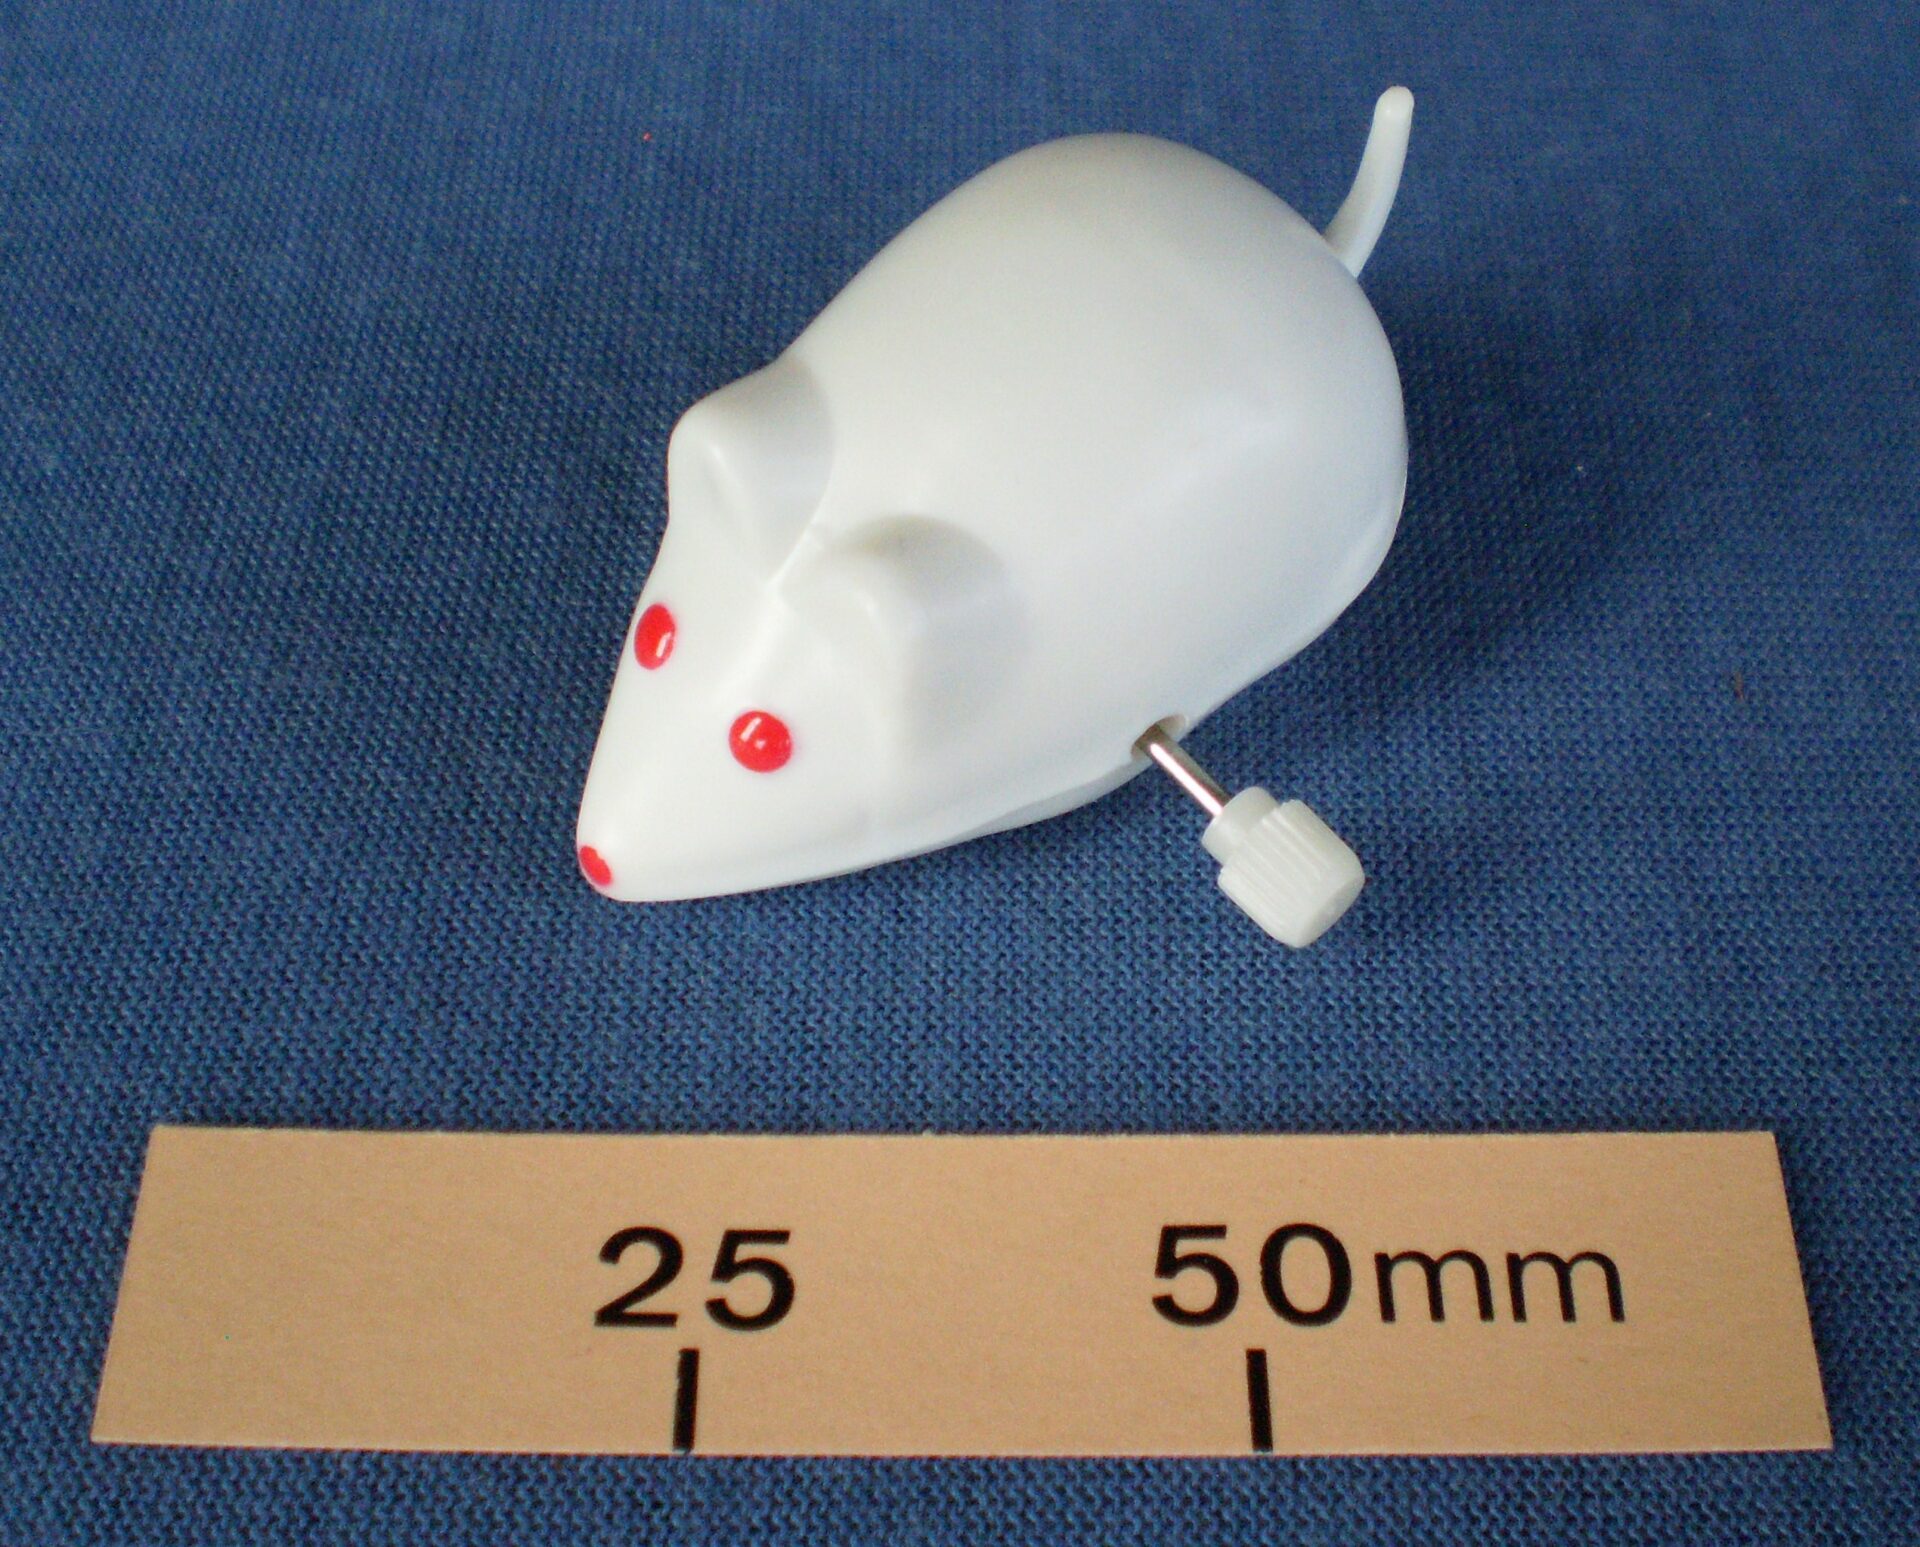 Plastic wind up mouse, made in China